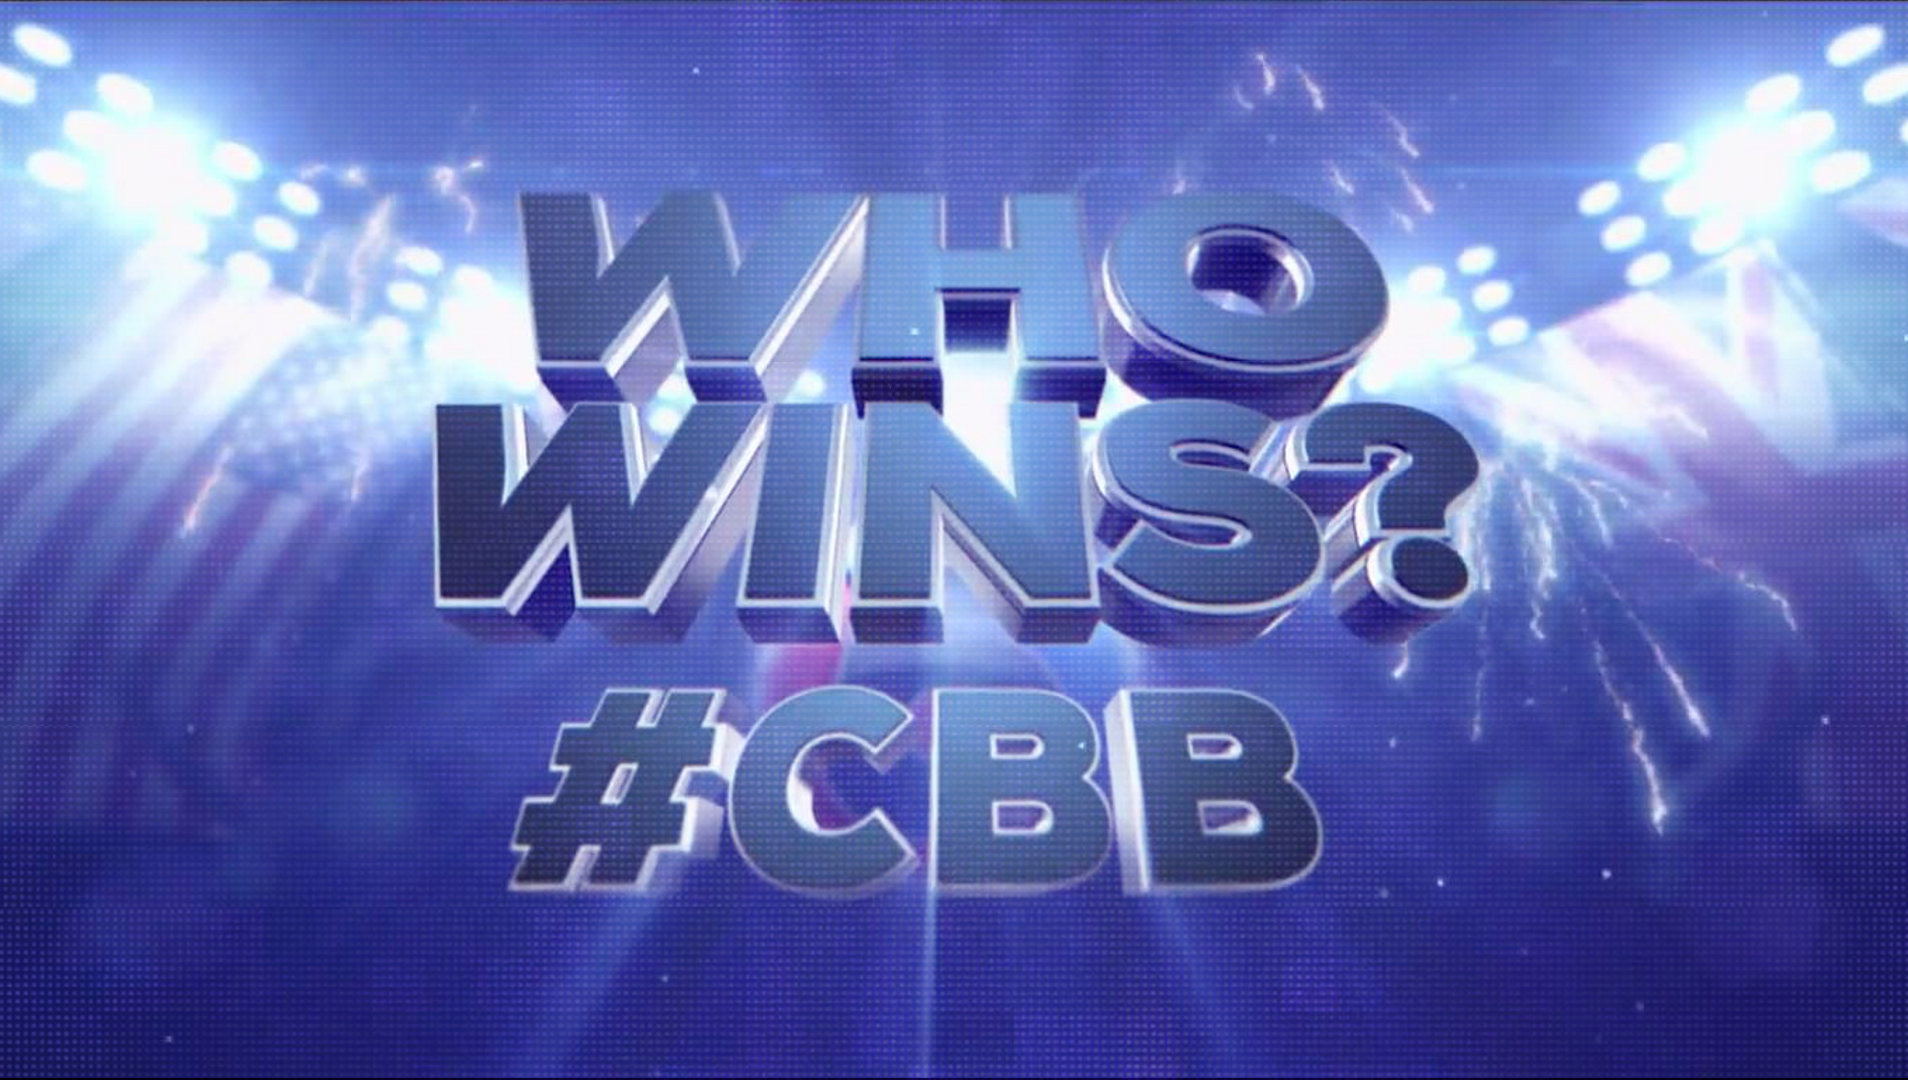 C5 planning Gold Stars Vs New Stars theme for Celebrity Big Brother